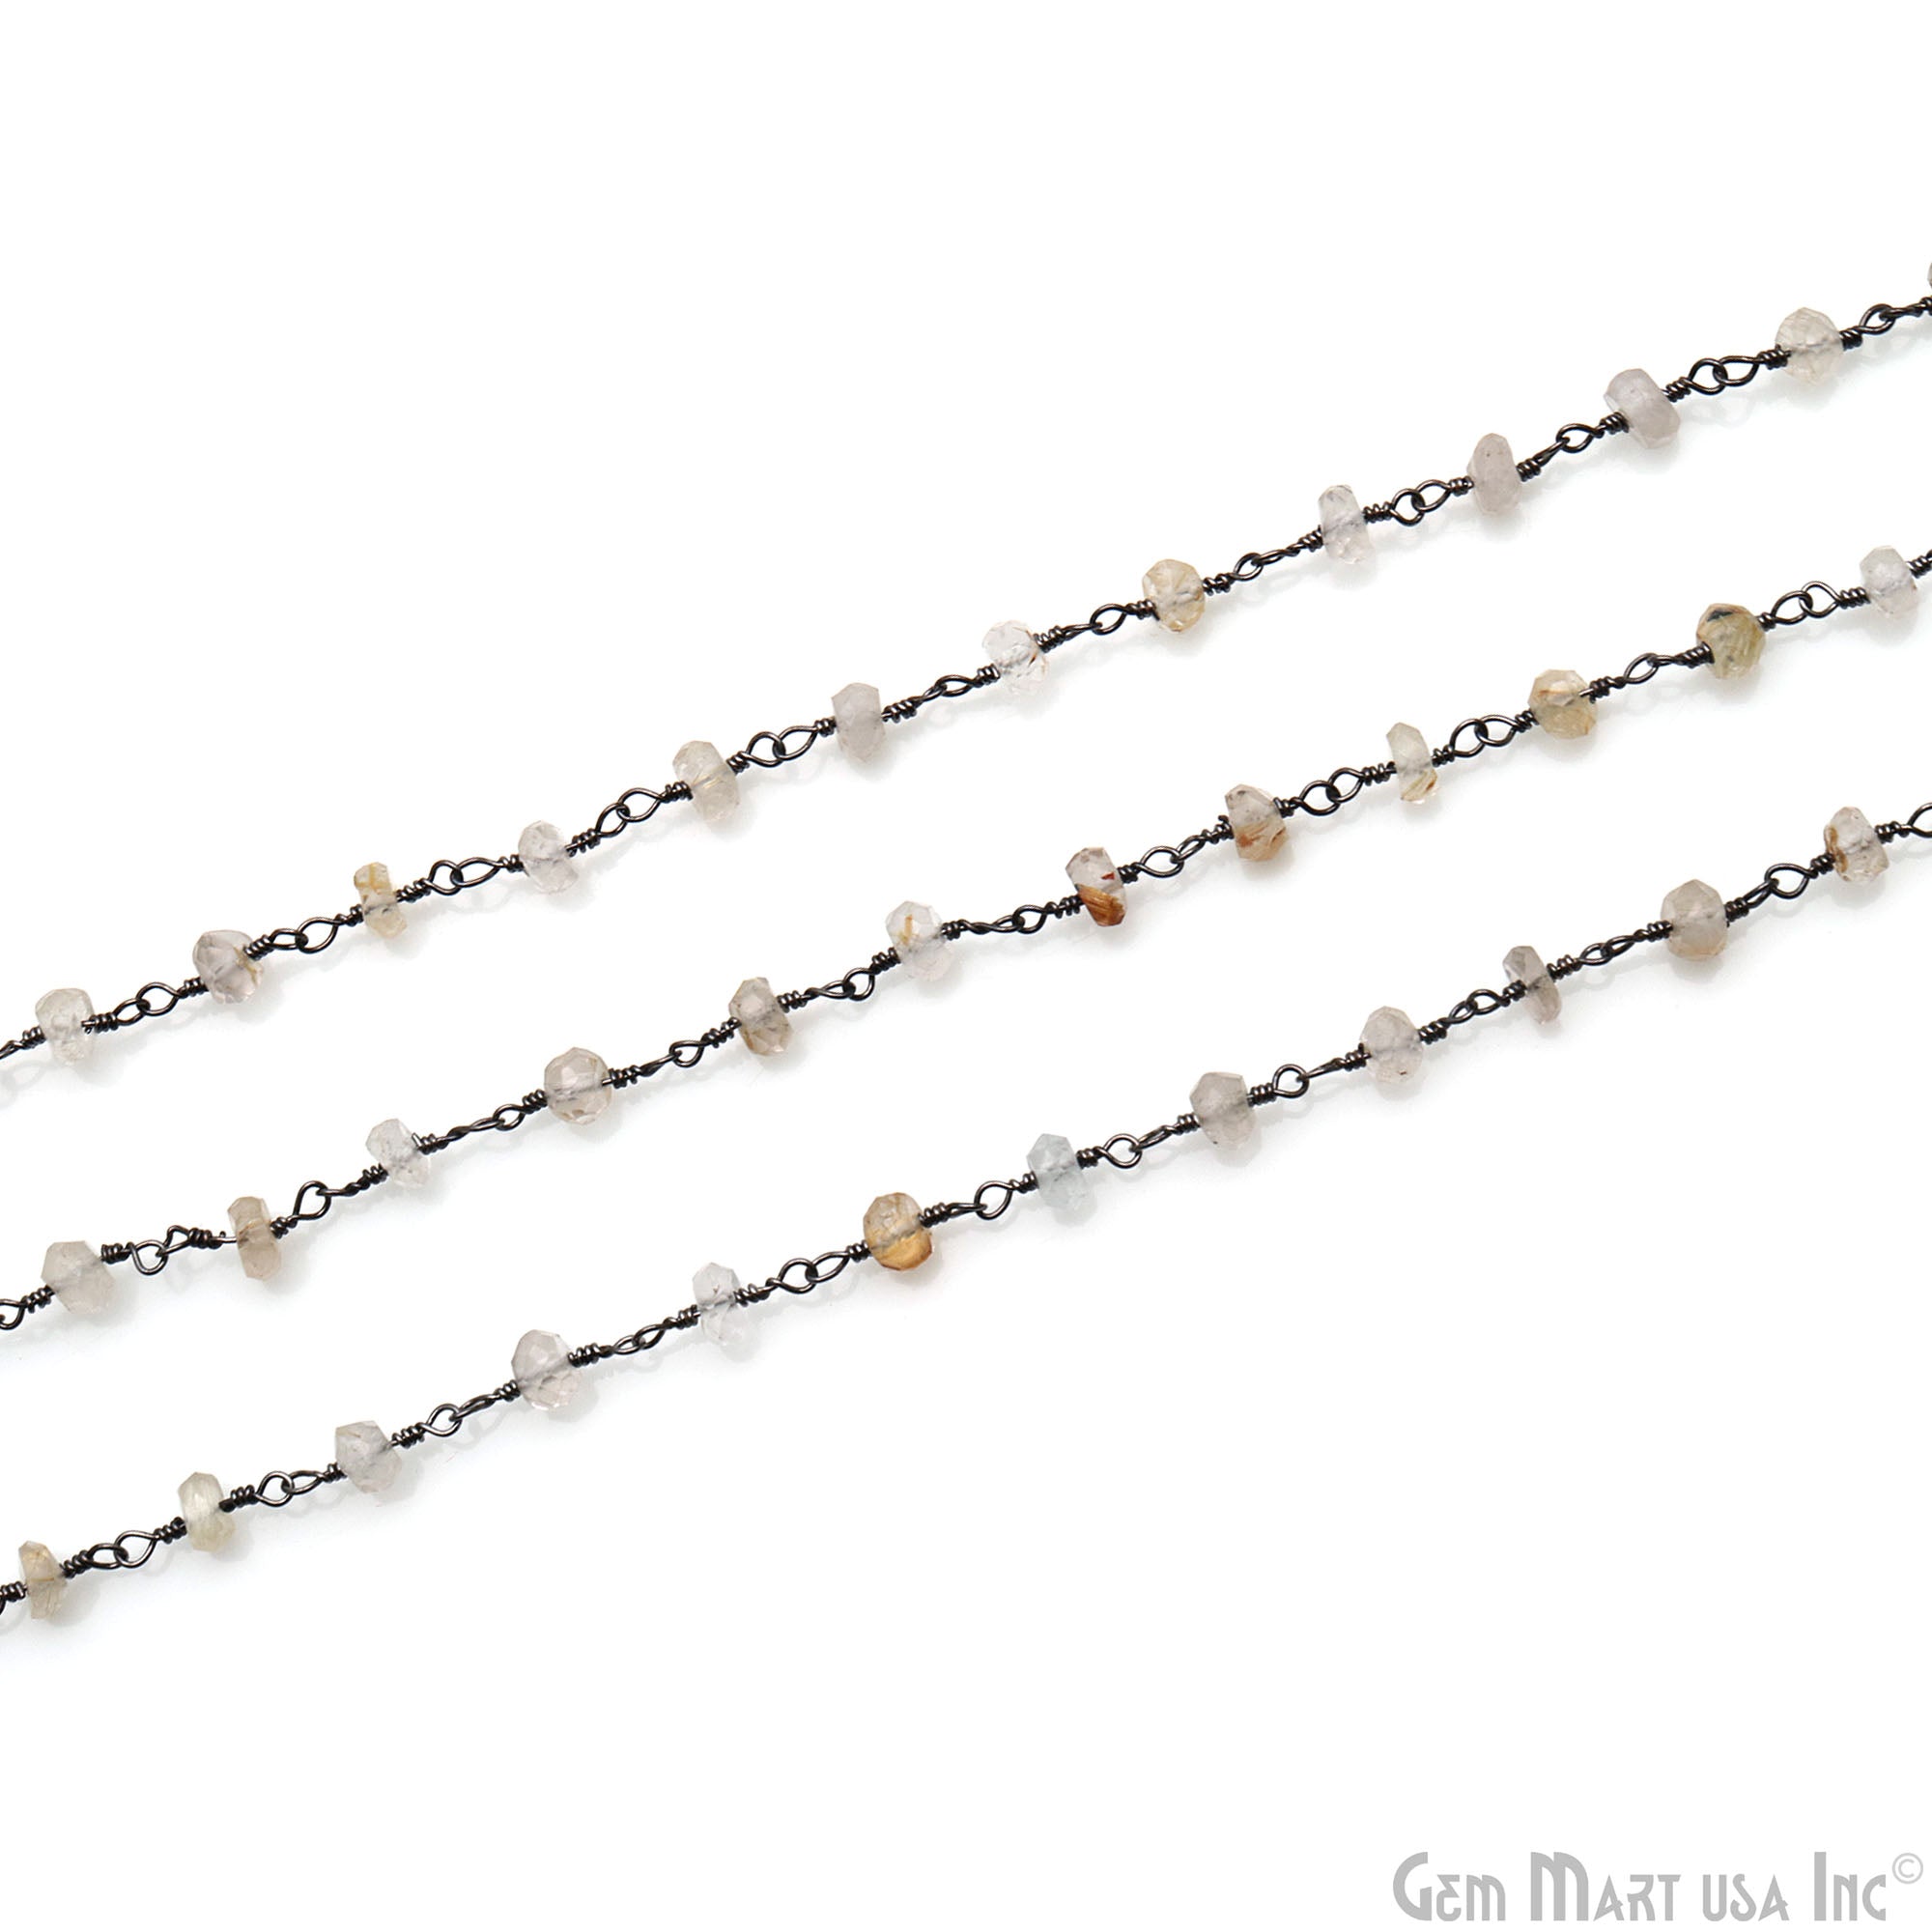 Golden Rutilated 4mm Faceted Beads Oxidized Wire Wrapped Rosary